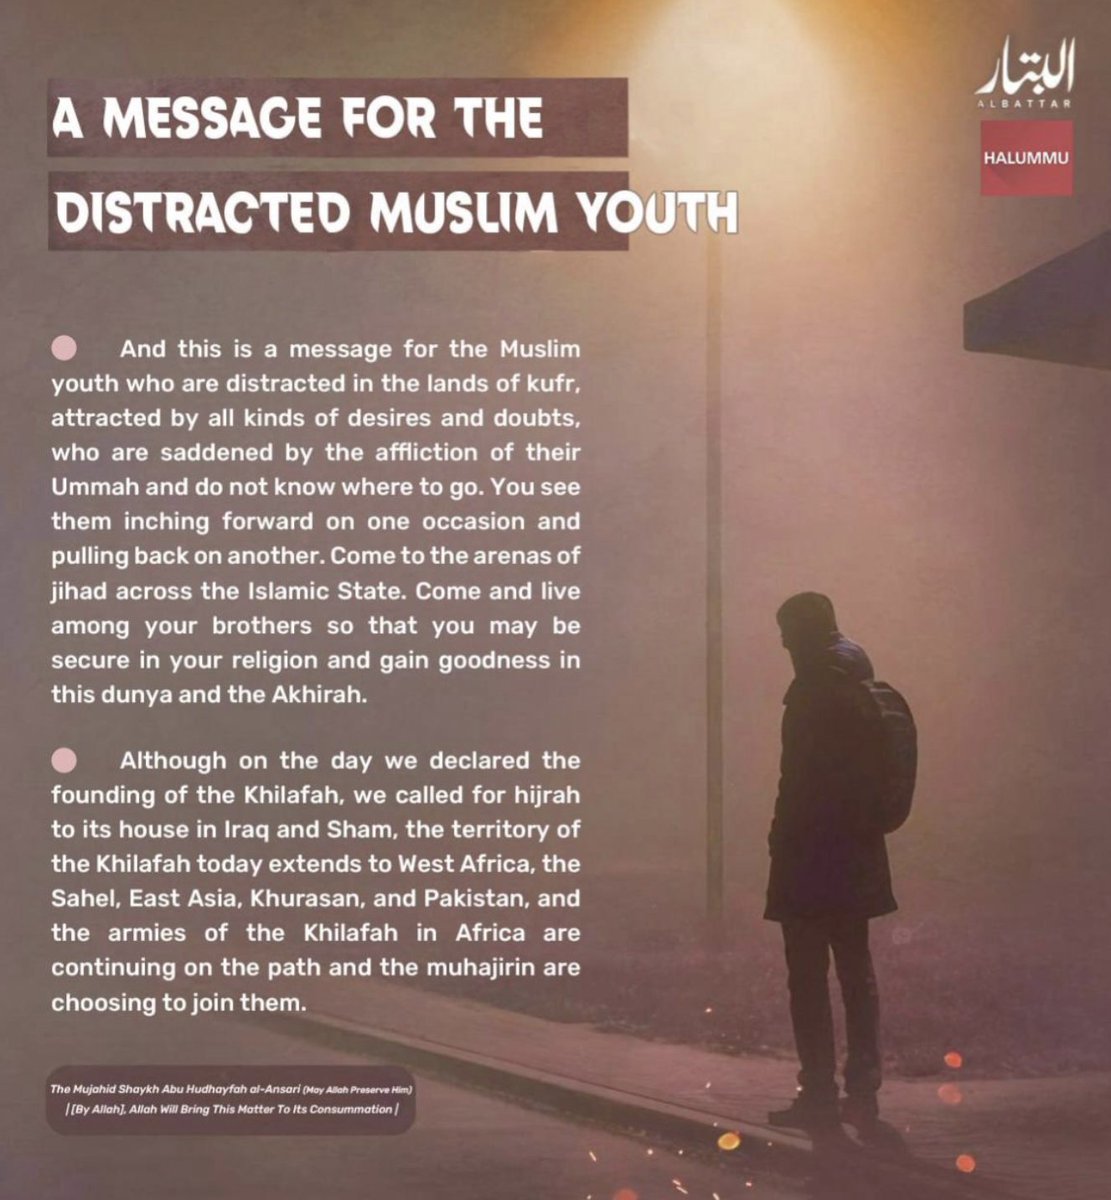 al-Battar and Halummu Foundation (Unofficial #IslamicState/#ISIS) Releases a Poster with a Message for Distracted #Muslim Youth to Travel (#Hijrah) to #IS Territories Across the World Read more: trackingterrorism.org/chatter/al-bat…